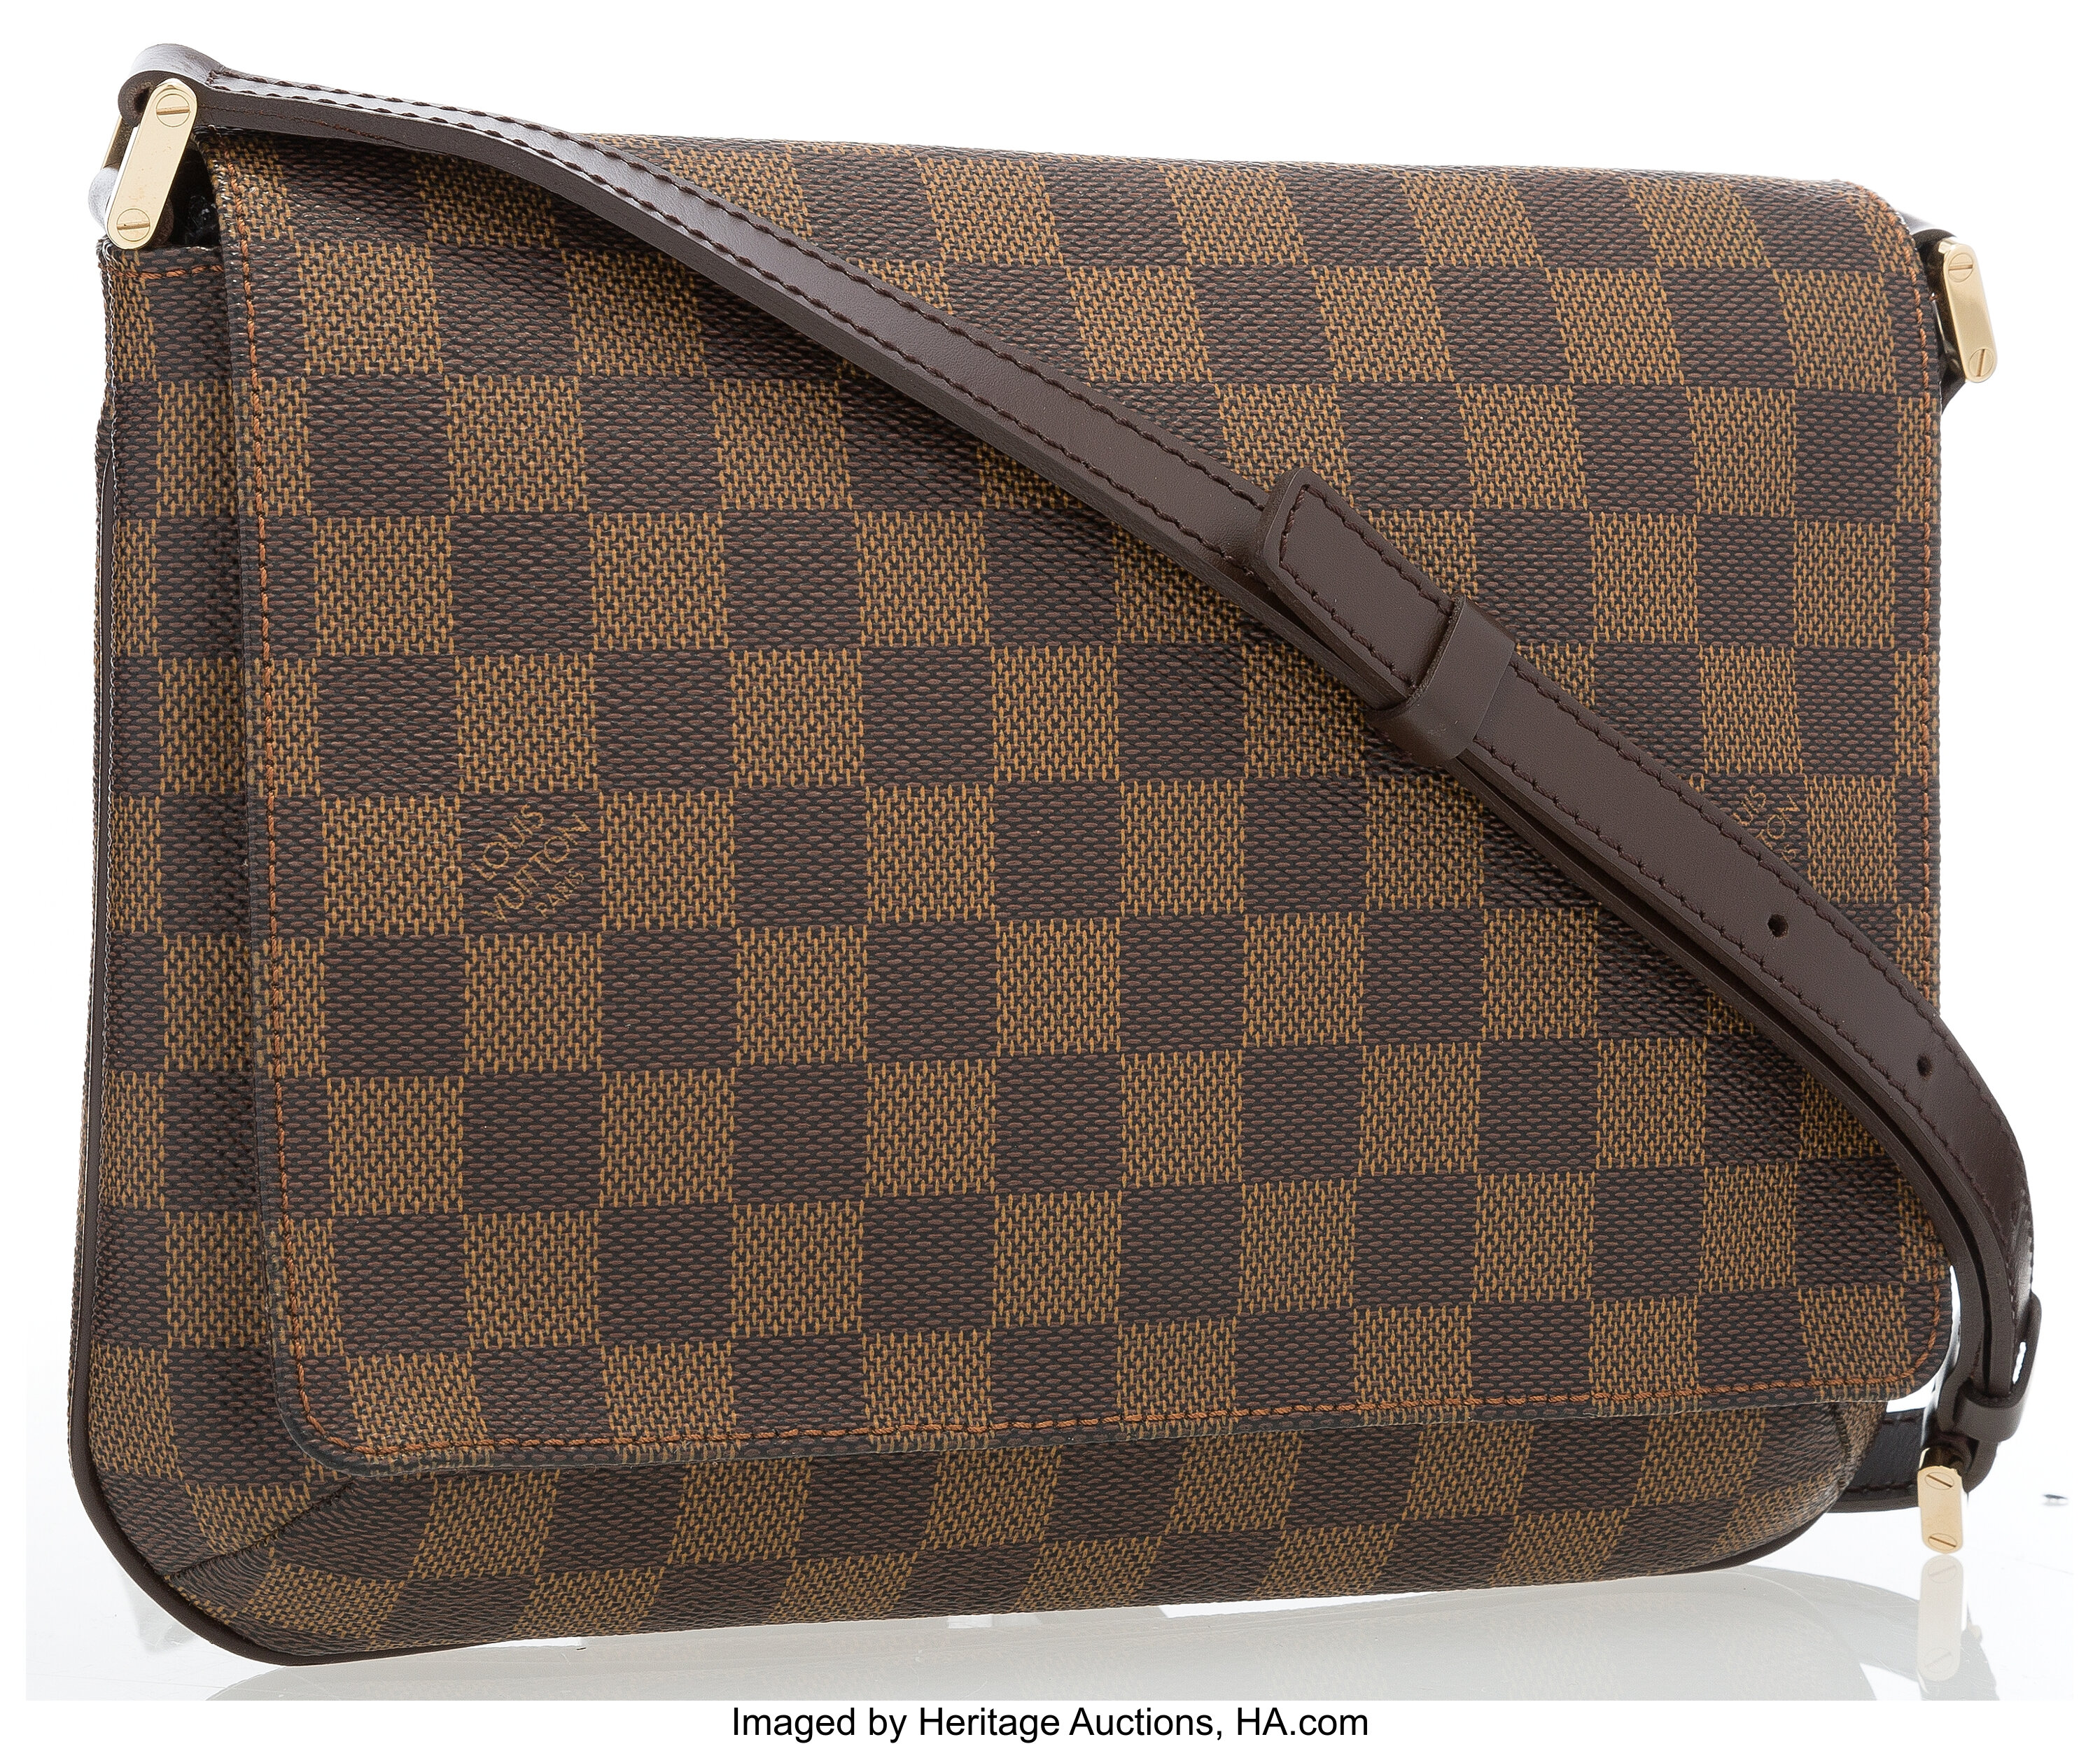 Sold at Auction: LOUIS VUITTON 'MARLY DRAGONNE' ACCESSORY POUCH